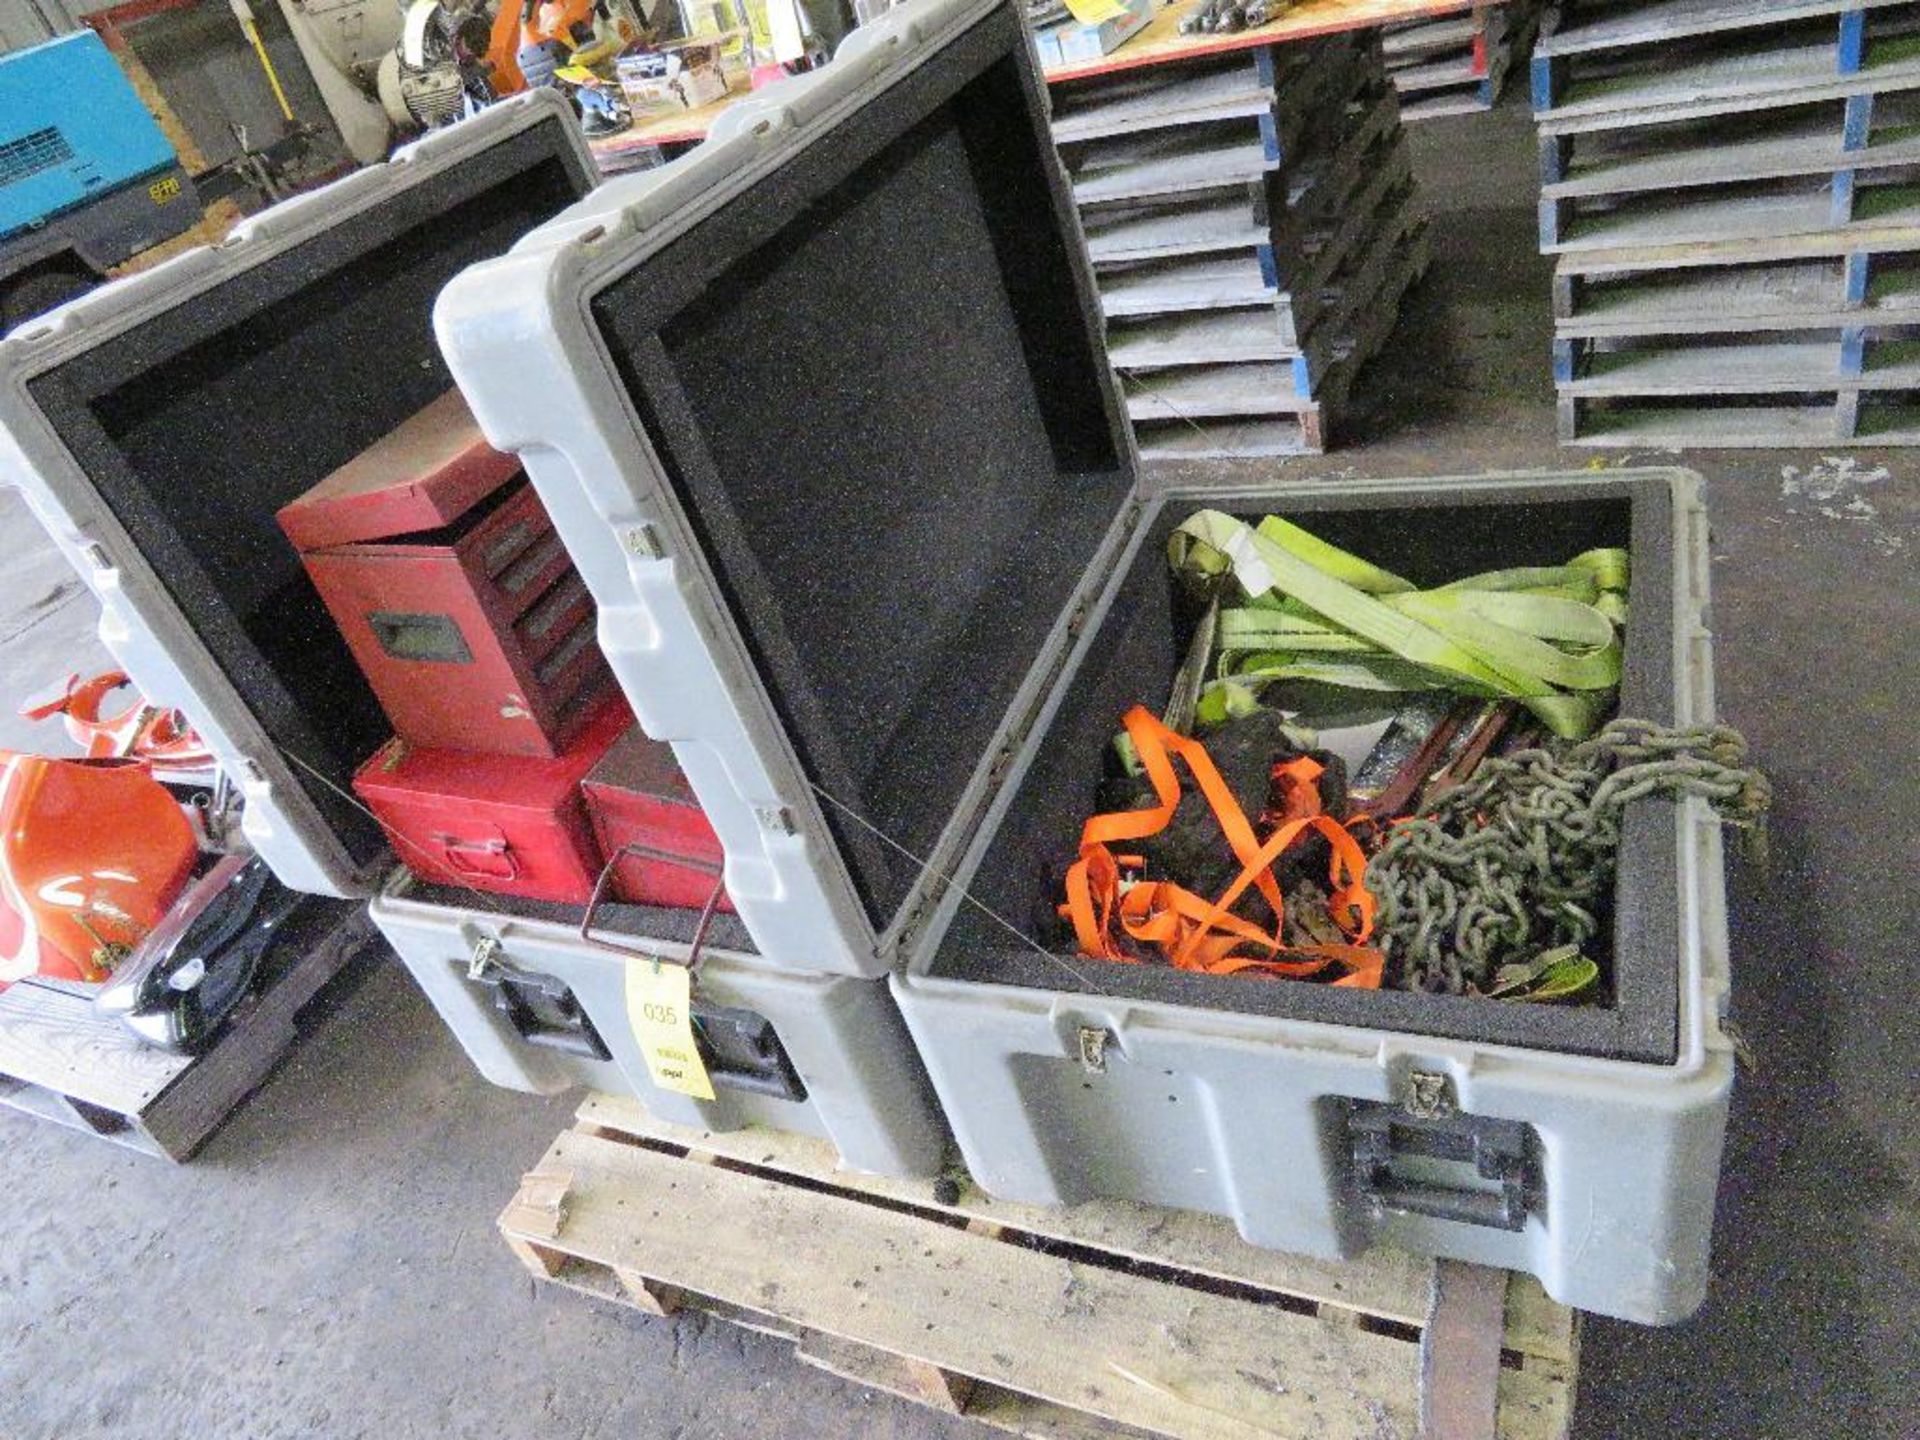 LOT: (2) Shipping Cases with Contents of Tie Downs, Chain Binders, Tool Boxes, etc. on (1) Pallet